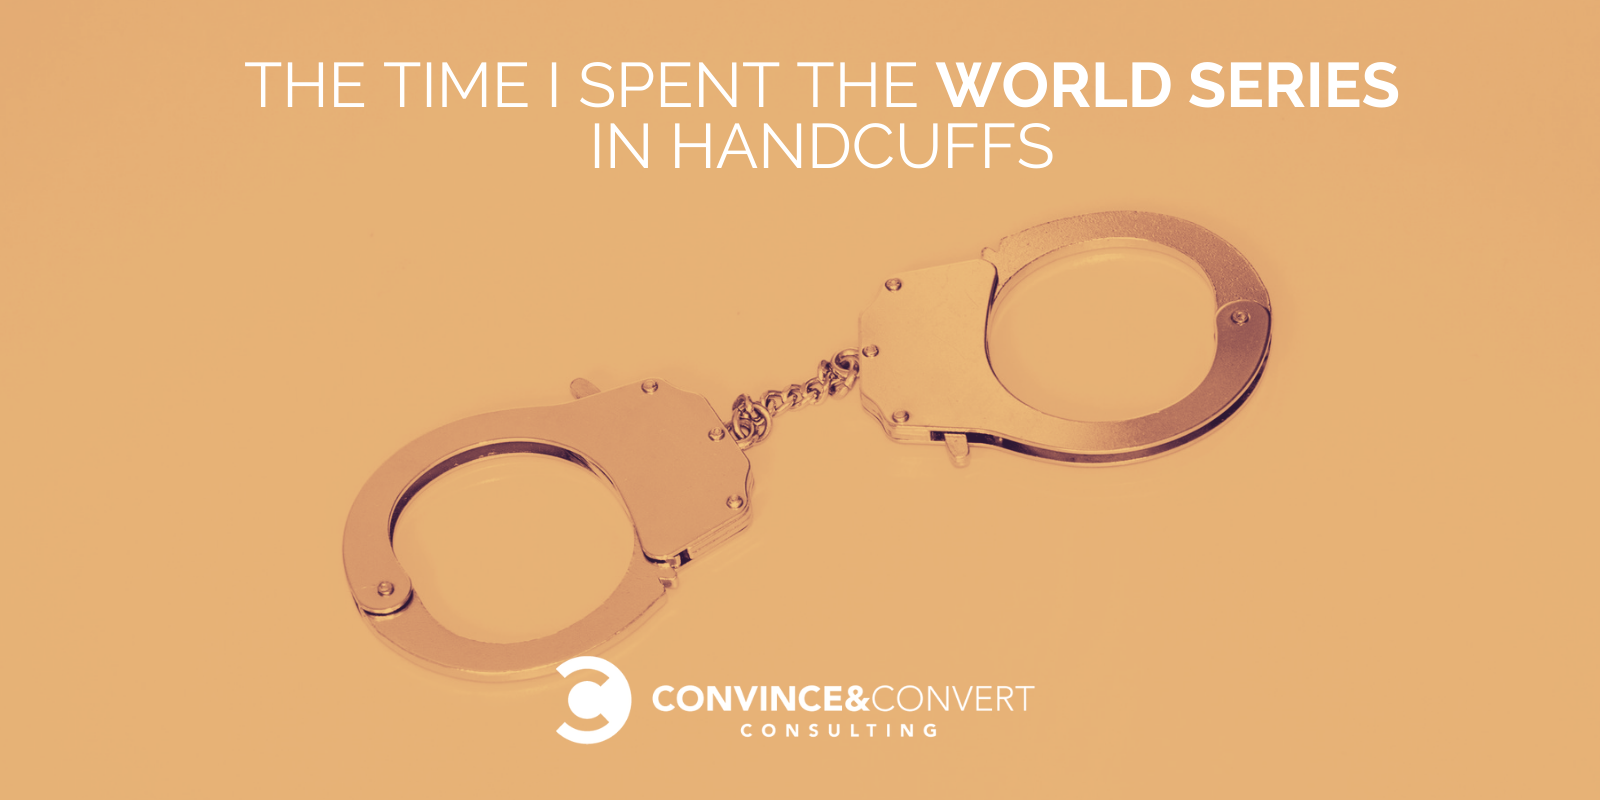 The time I spent the World Series in handcuffs